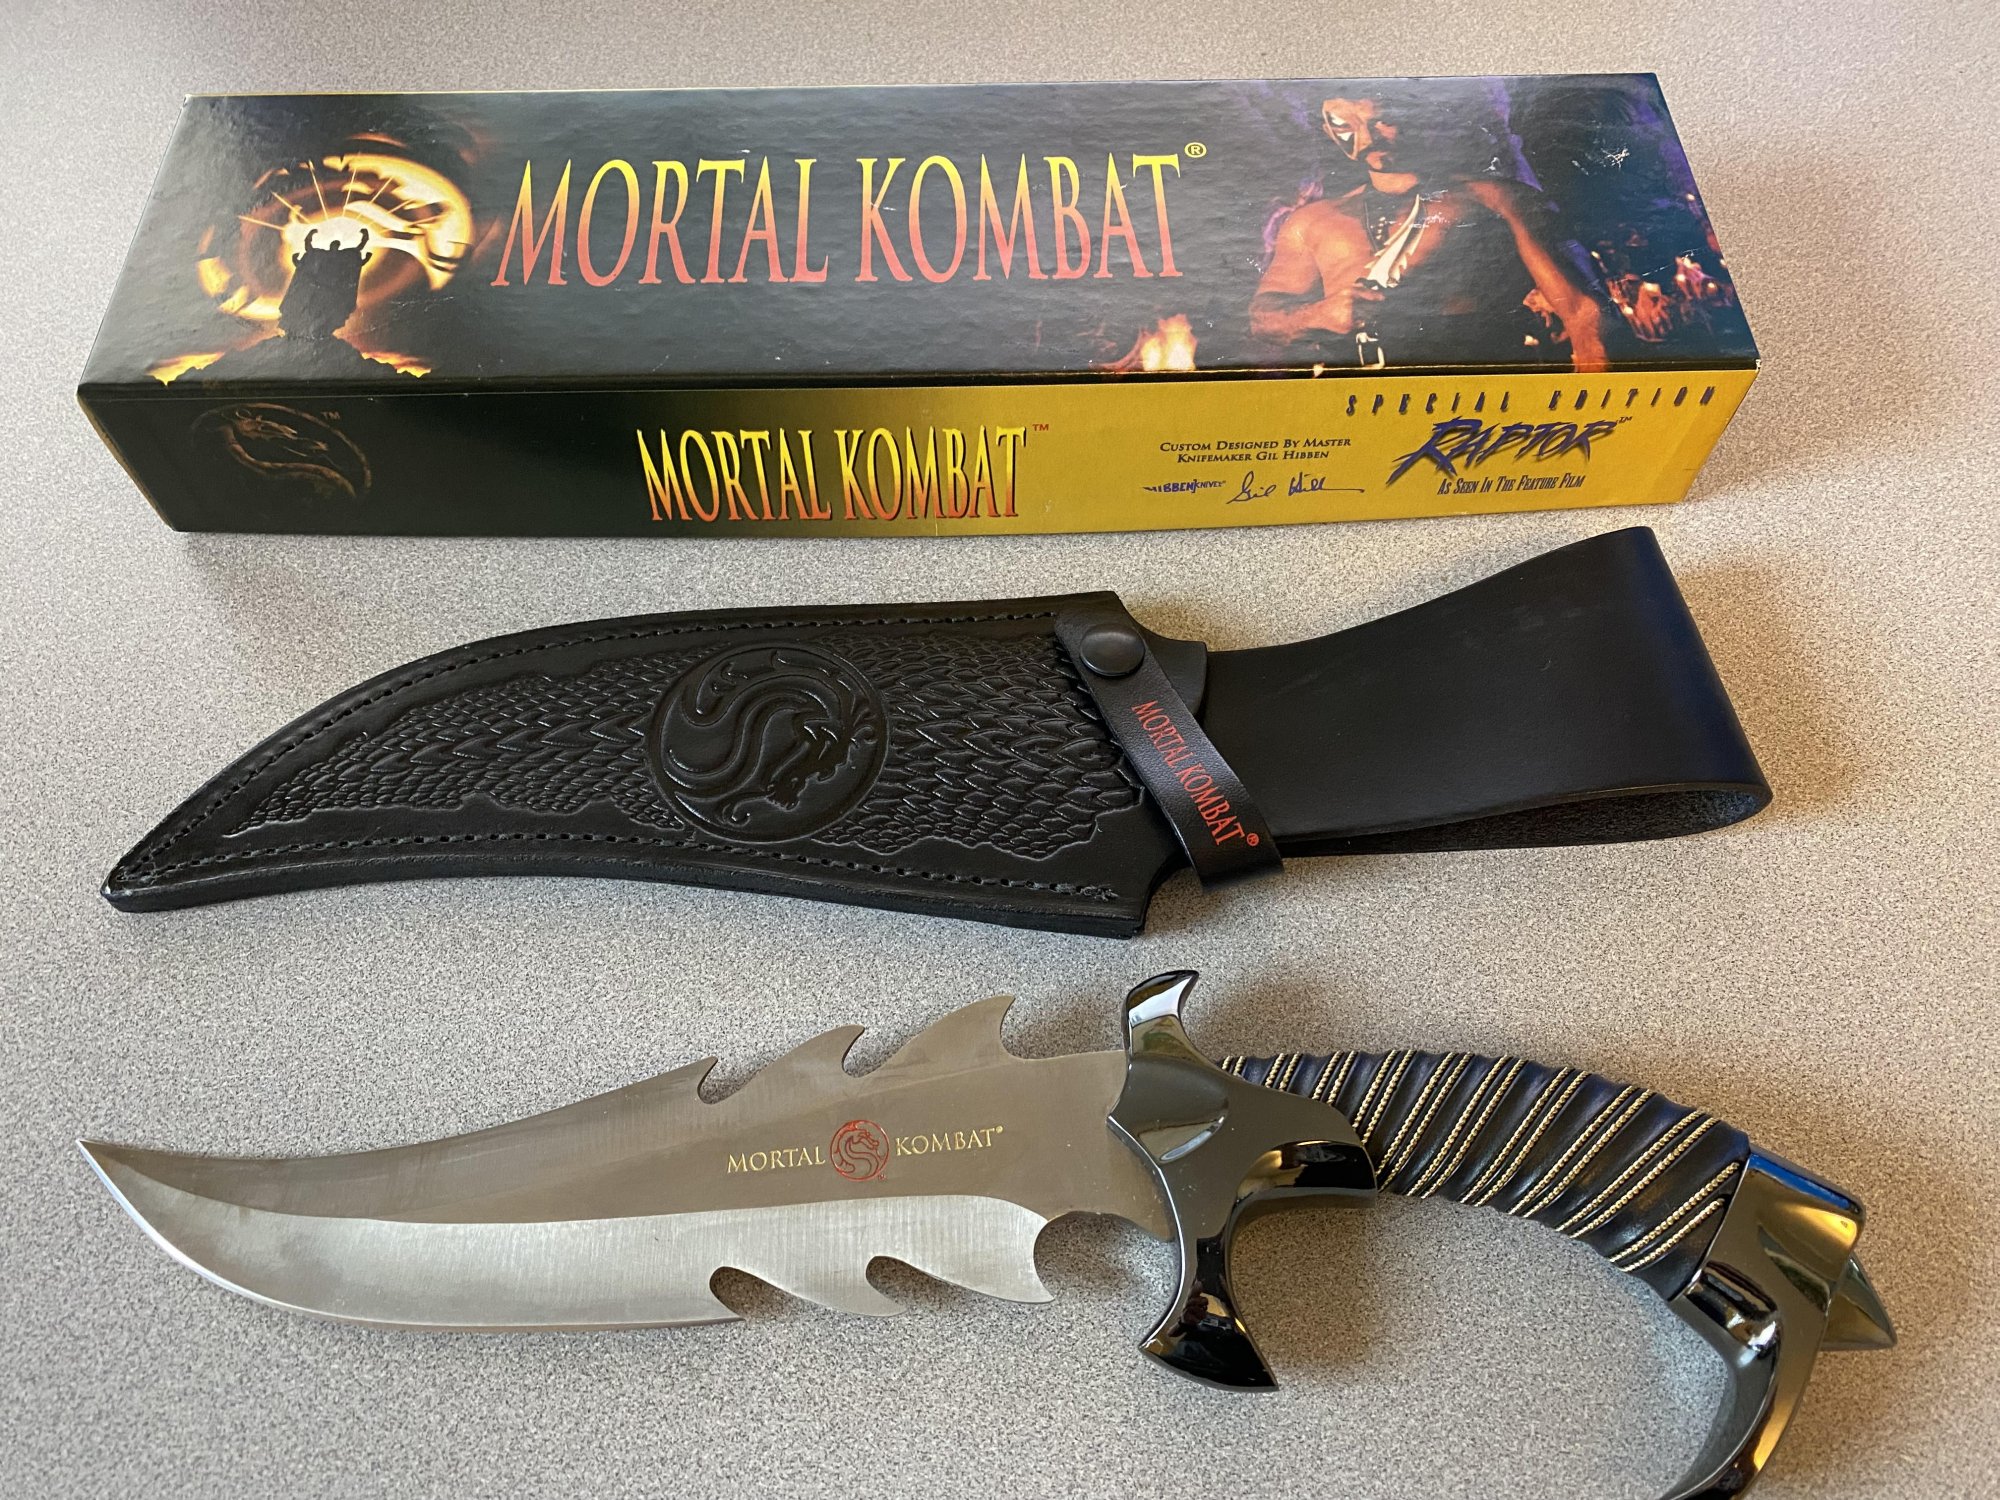 Ed Boon on X: Definitely don't konsider myself a knife guy  but it  was kool to find this in my basement. Embarrassed to say I have no memory  of who gave